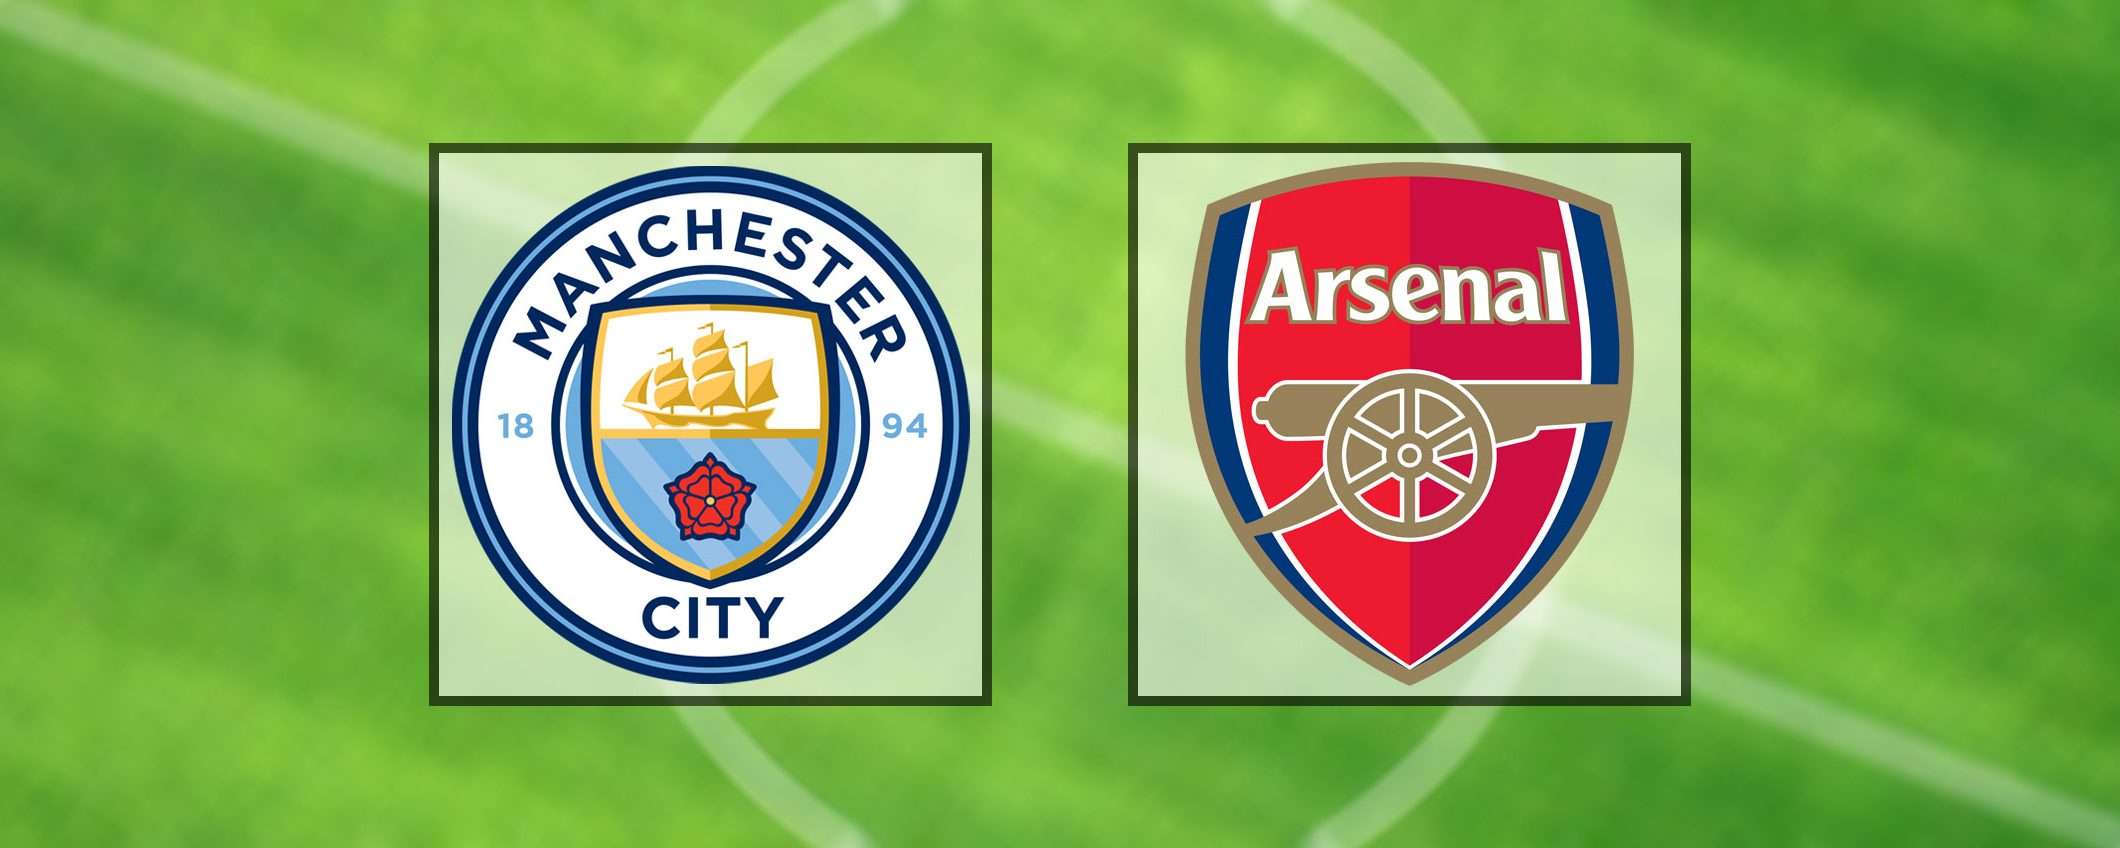 Come vedere Manchester City-Arsenal in streaming